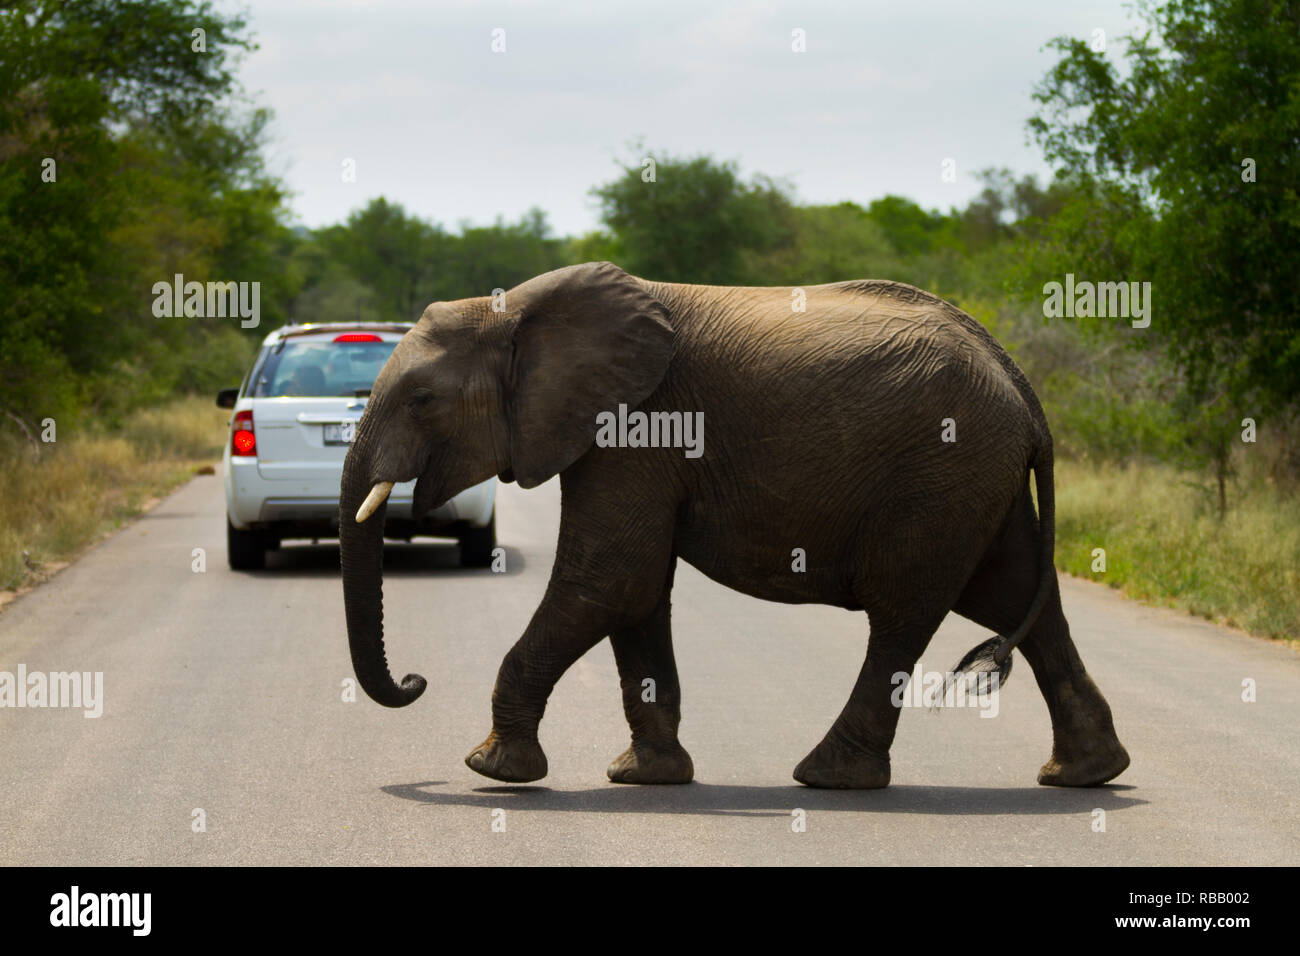 Elephant crossing the road, Kruger National Park, South Africa Stock Photo